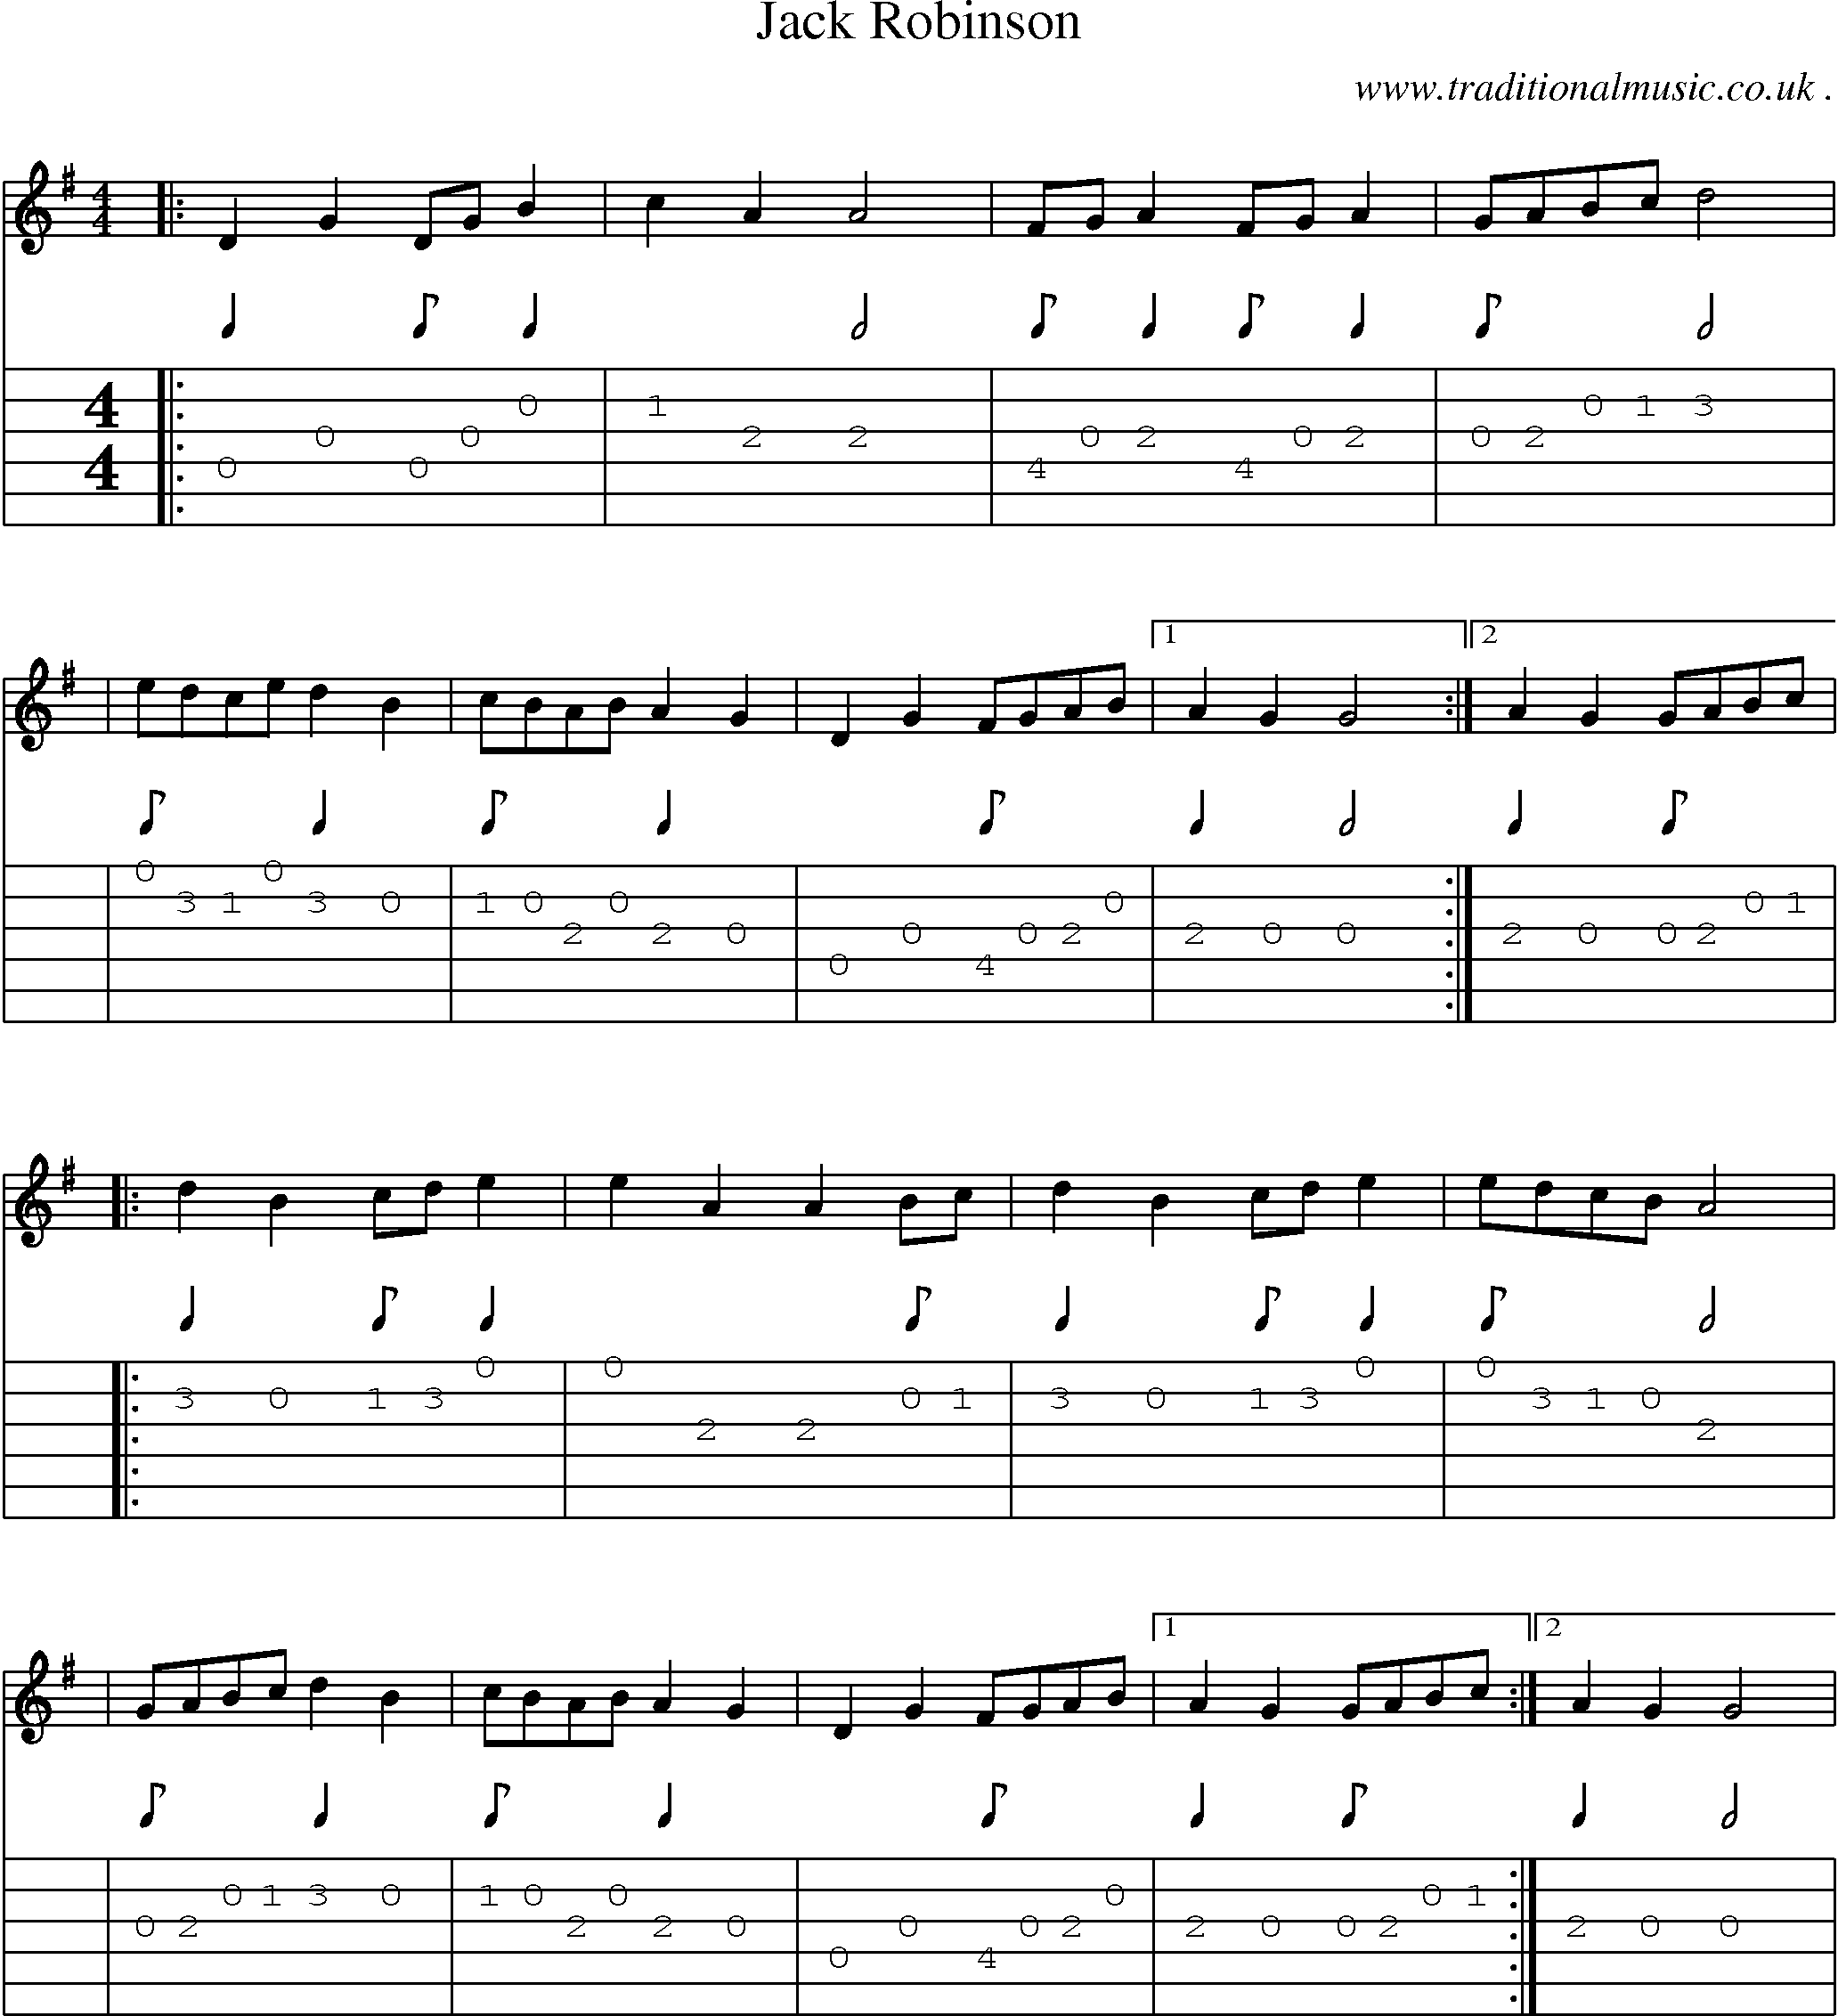 Sheet-Music and Guitar Tabs for Jack Robinson